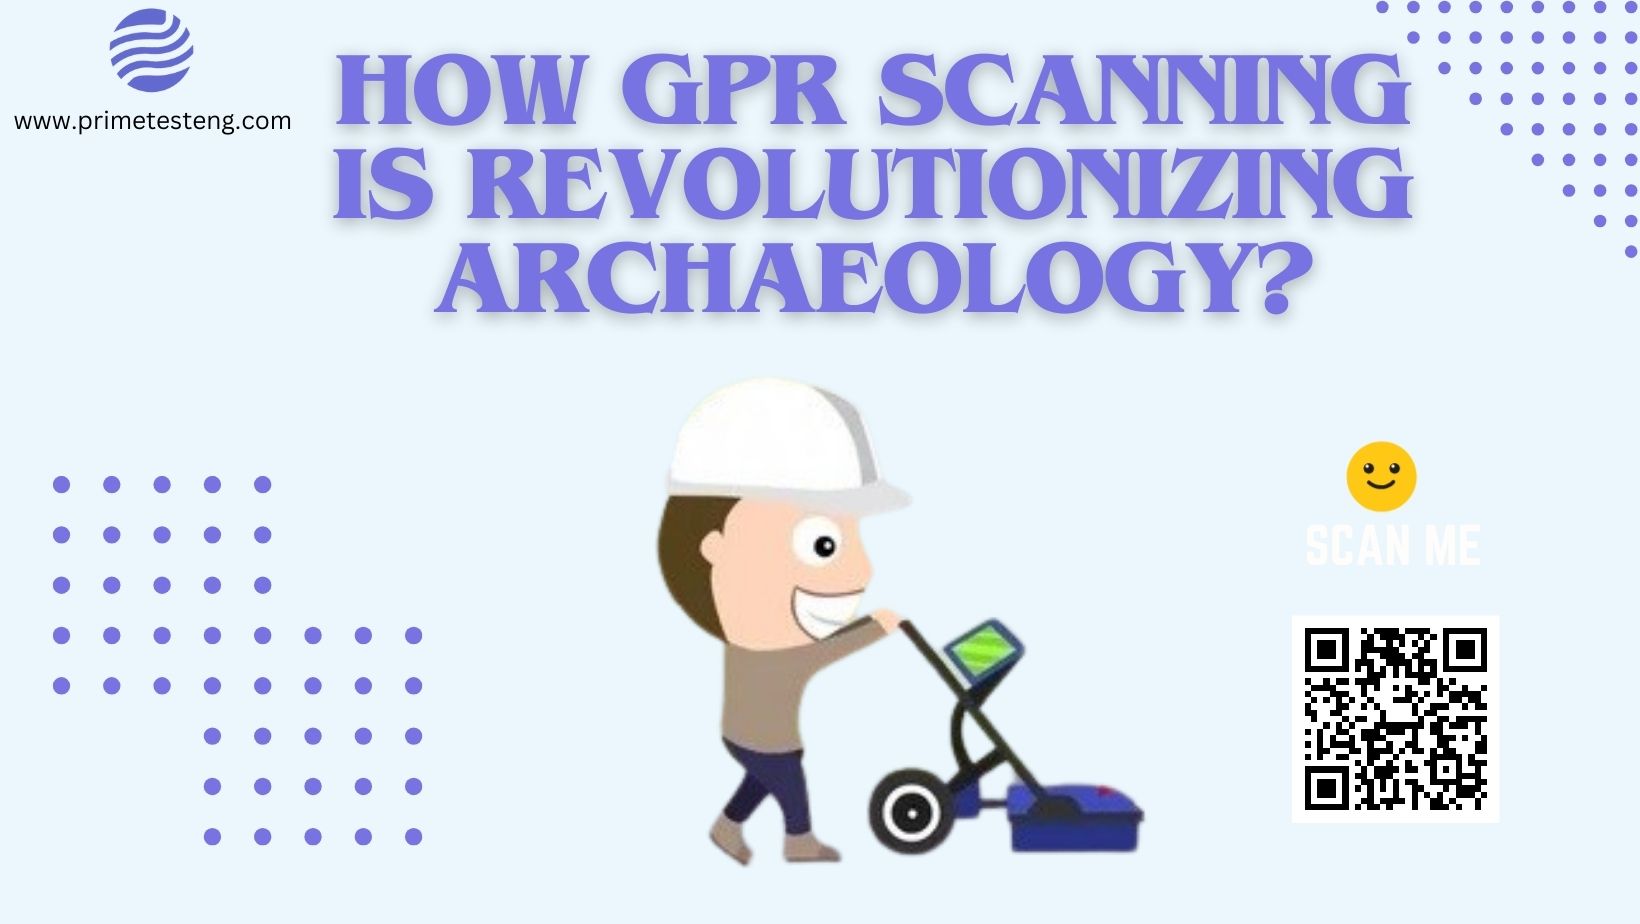 How GPR Scanning is Revolutionizing Archaeology?